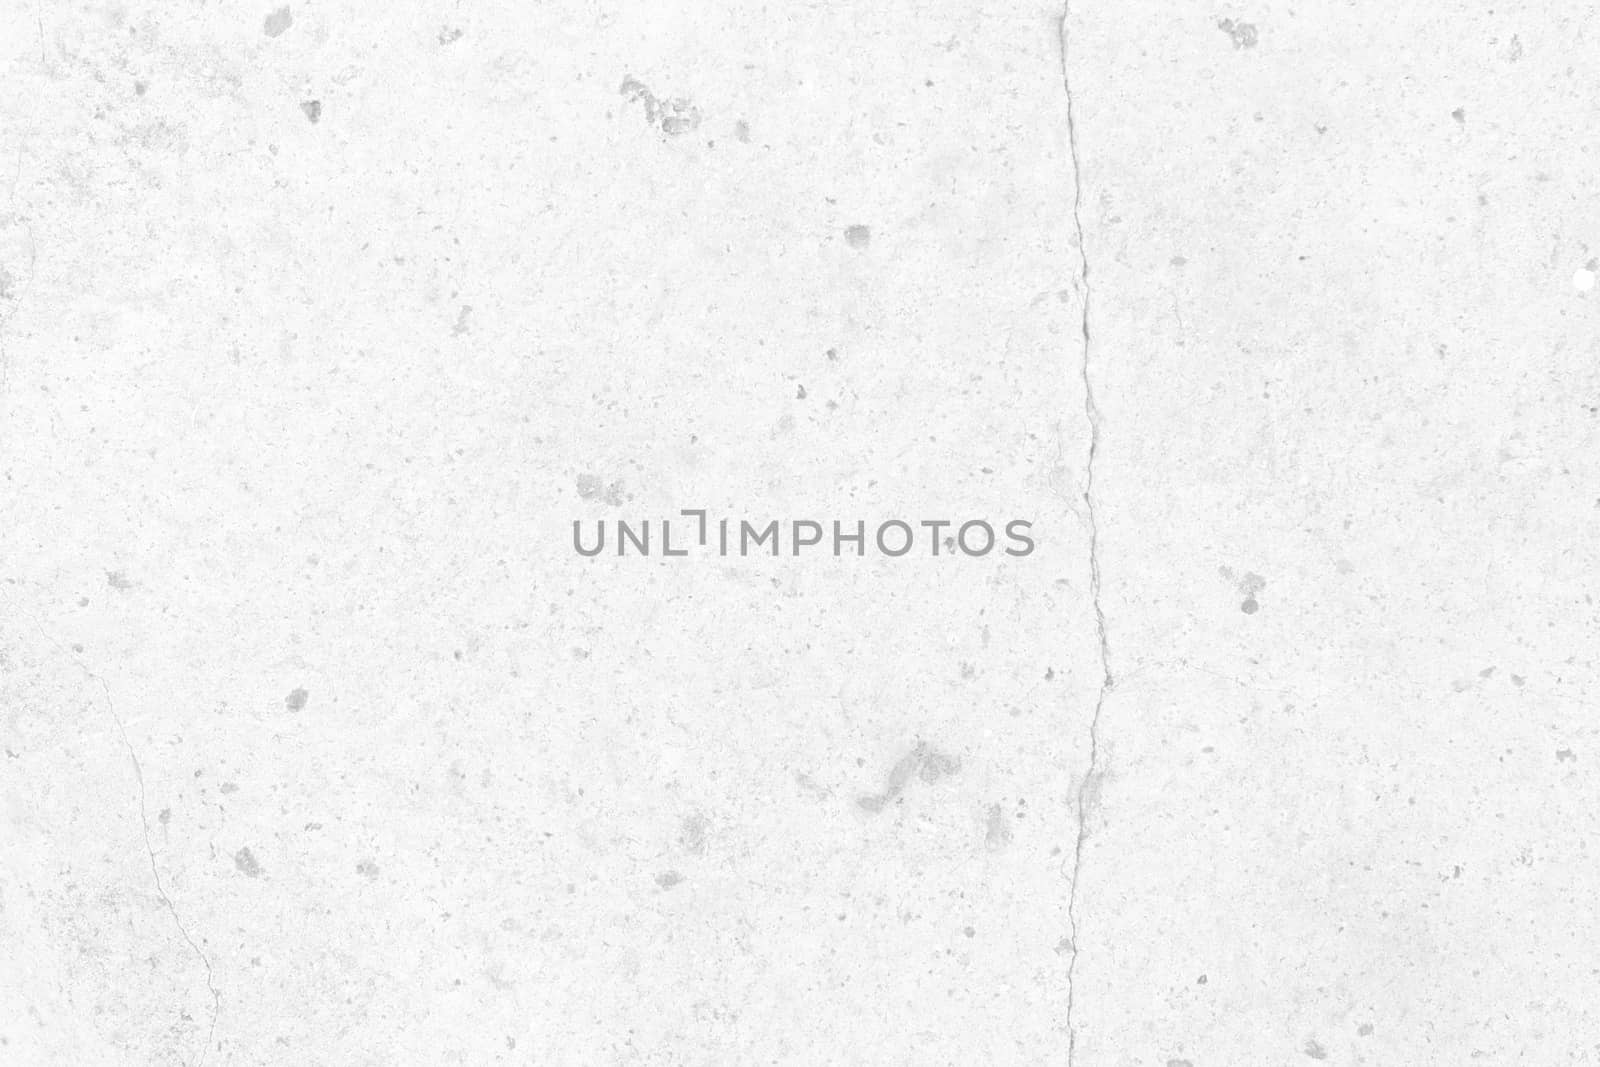 White Grunge Concrete Wall Texture Background, Suitable for Presentation and Web Templates.